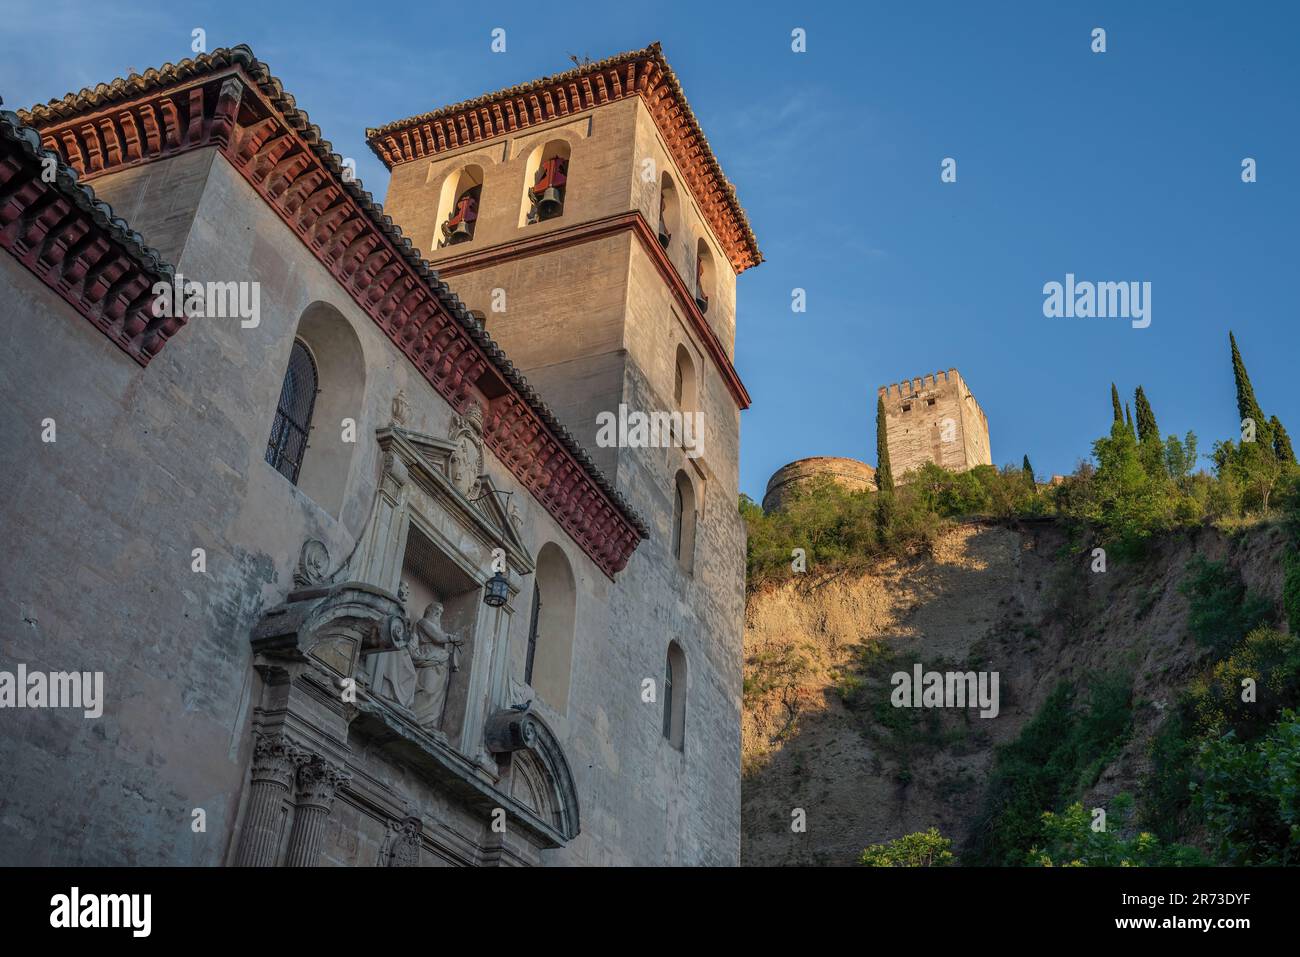 Church of St. Peter and St. Paul  (Iglesia de San Pedro y San Pablo) with Alhambra on background - Granada, Andalusia, Spain Stock Photo